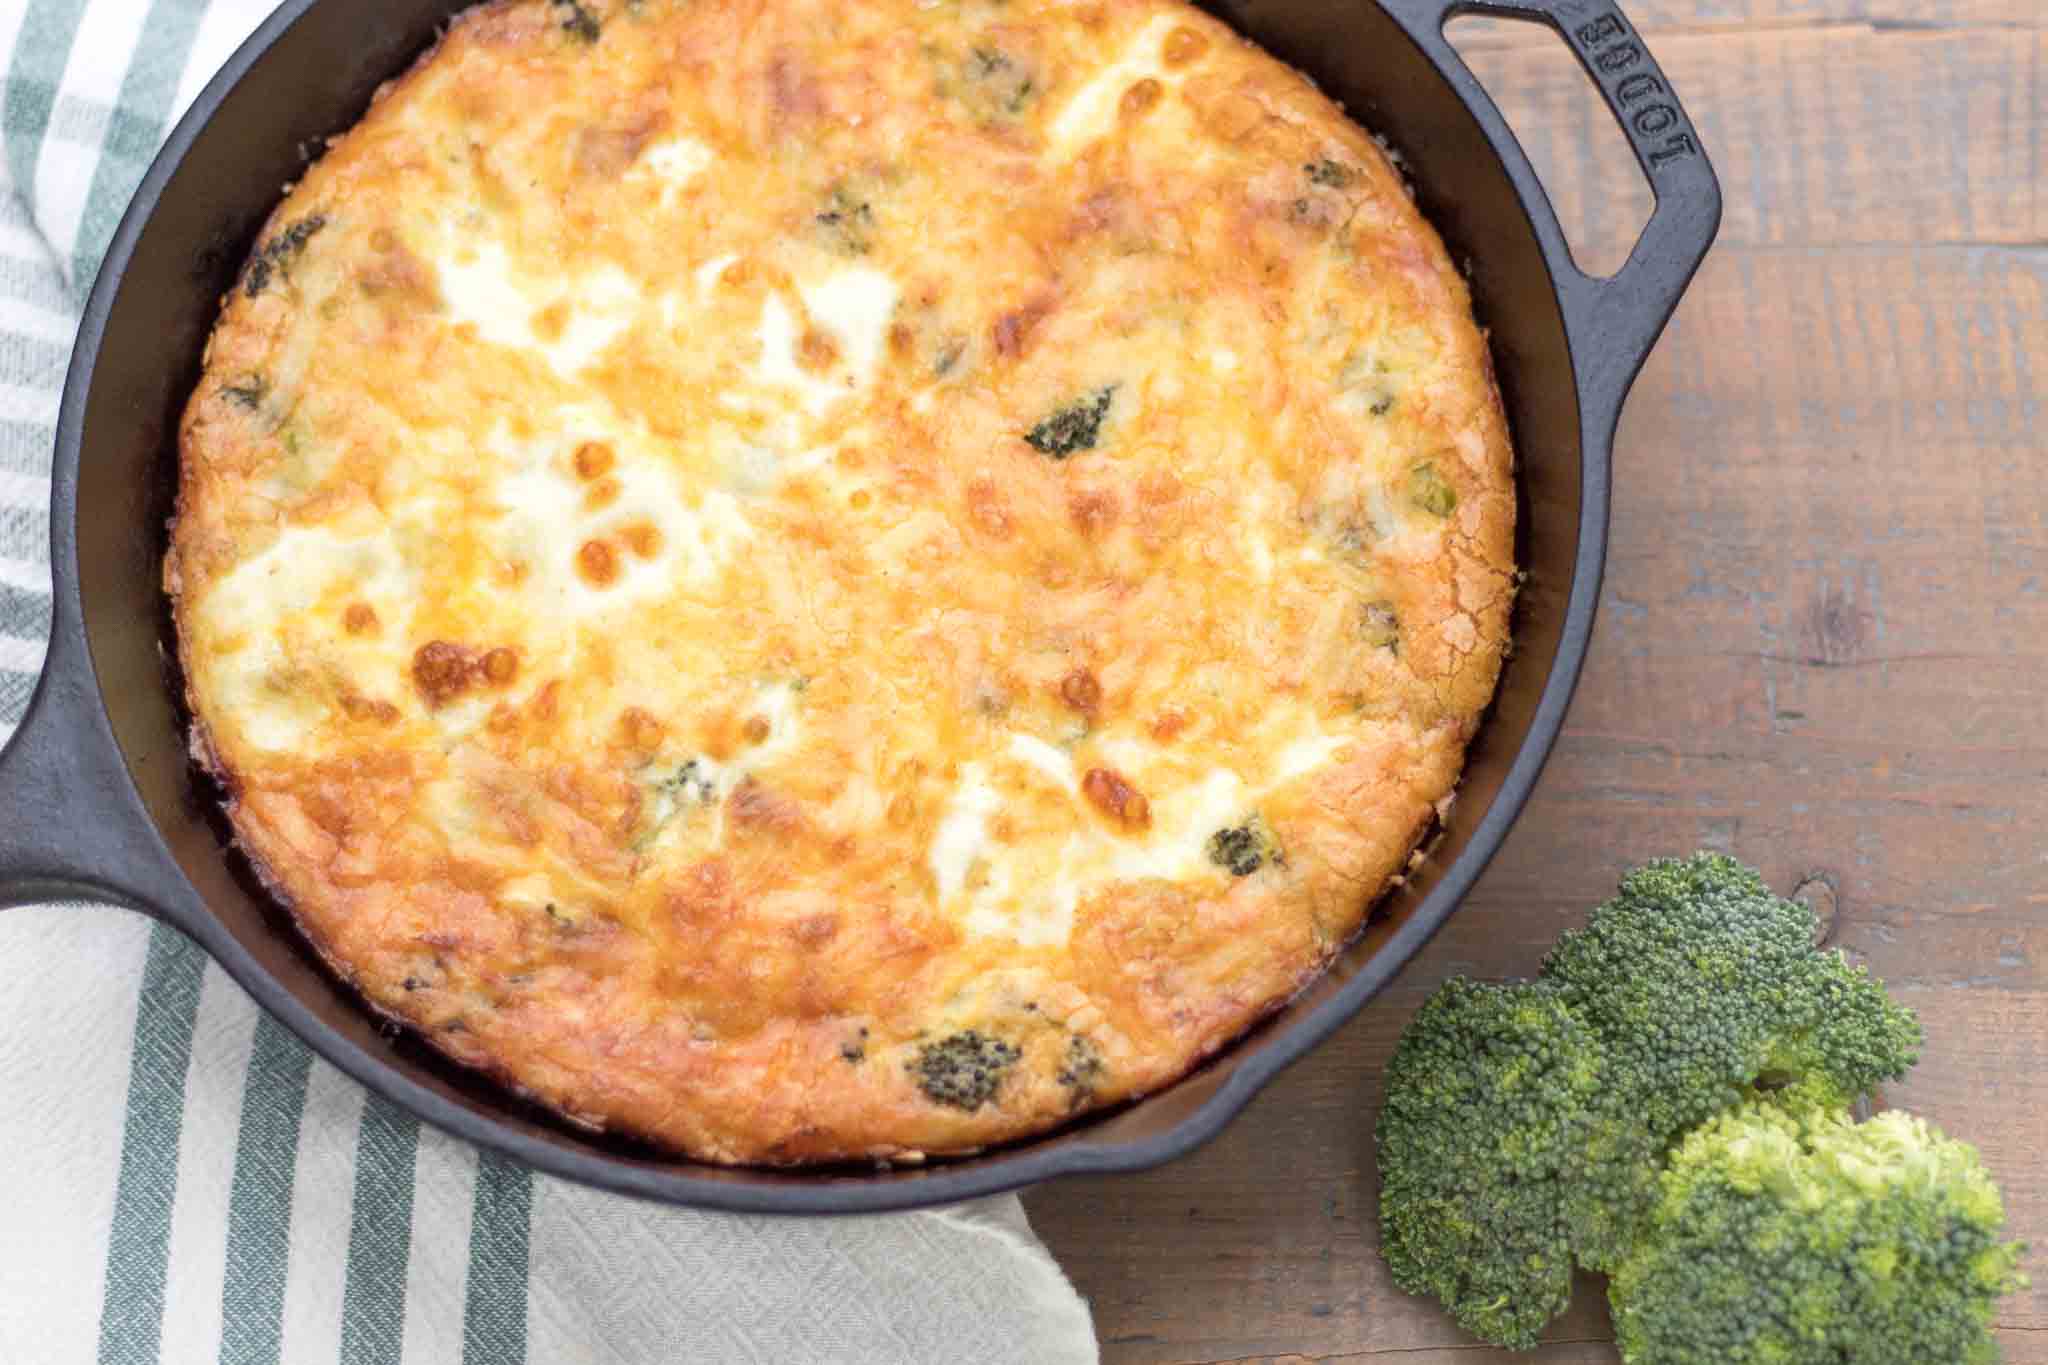 baked broccoli cheddar quiche in a cast iron skillet with broccoli florets on a farmhouse table